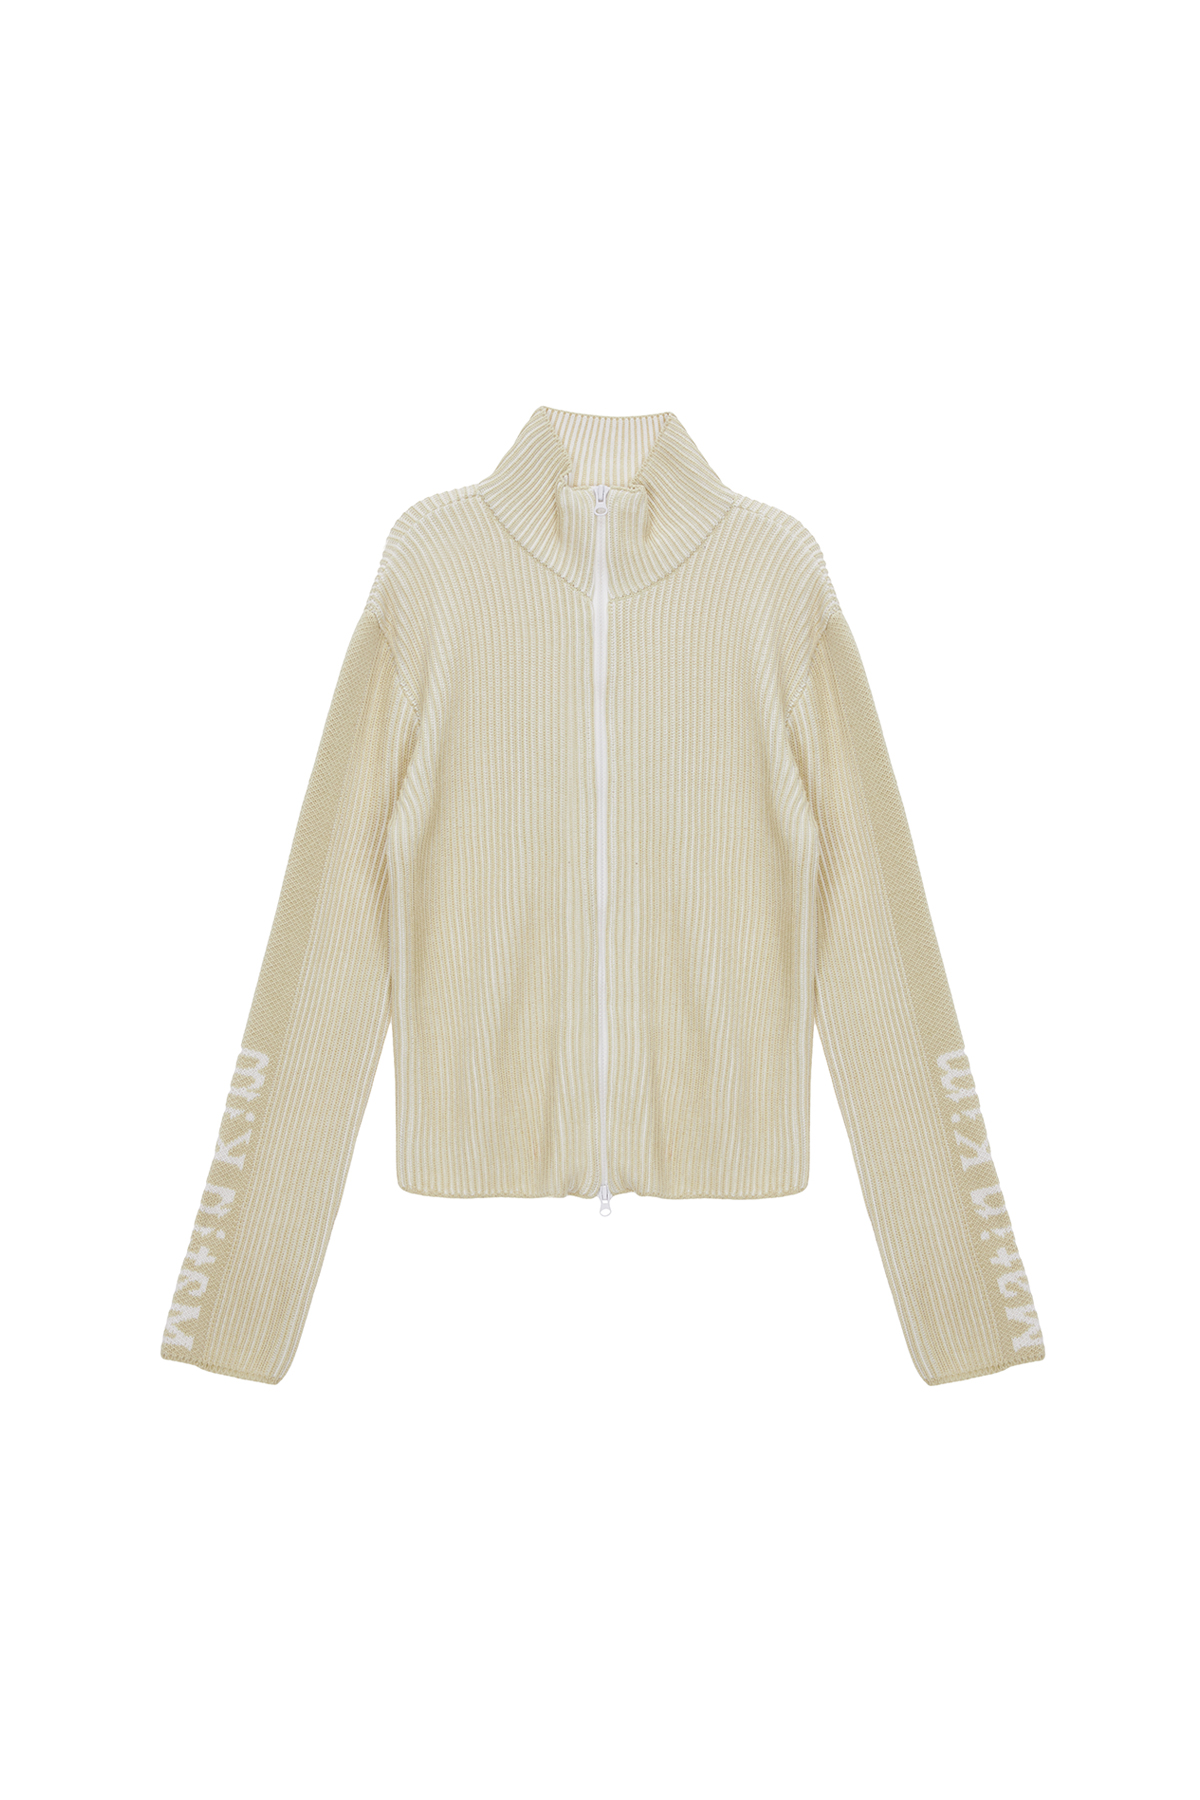 SLEEVE POINT ZIP UP CARDIGAN IN IVORY